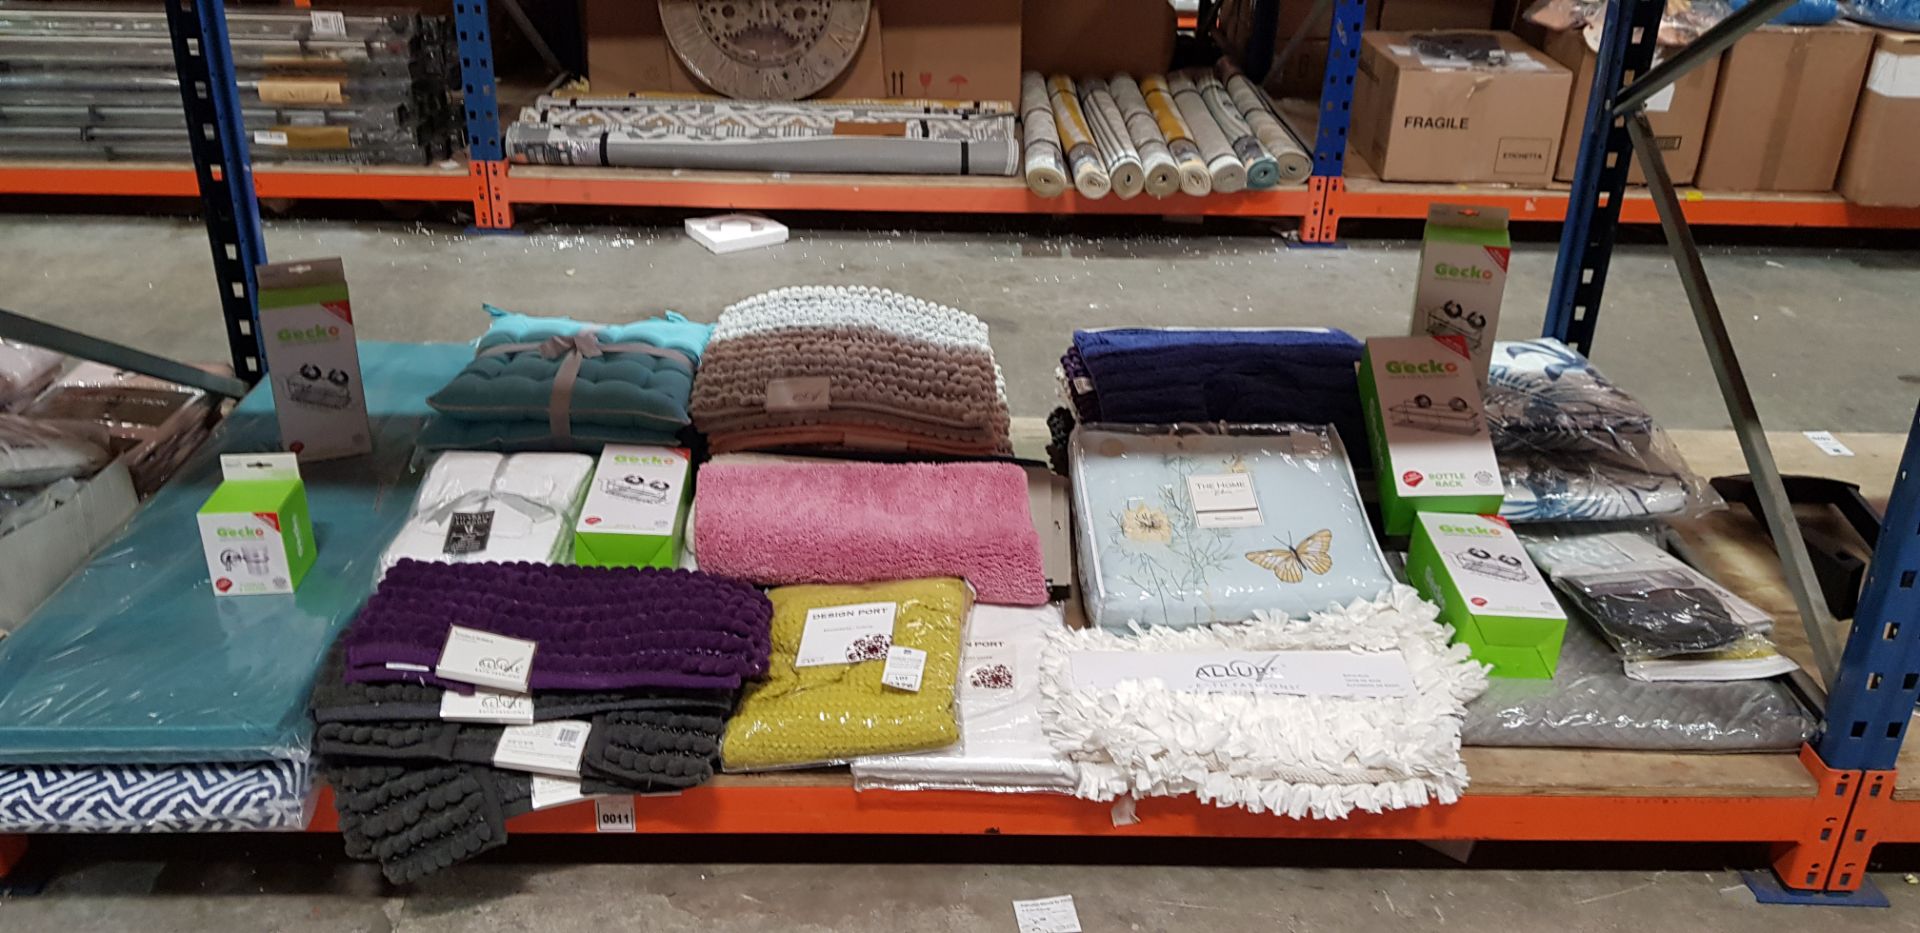 FULL BAY MIXED HOMEWARE LOT CONTAINING ALLURE BATH MATS IN VARIOUS STYLES - THE HOME BEDSPREAD -